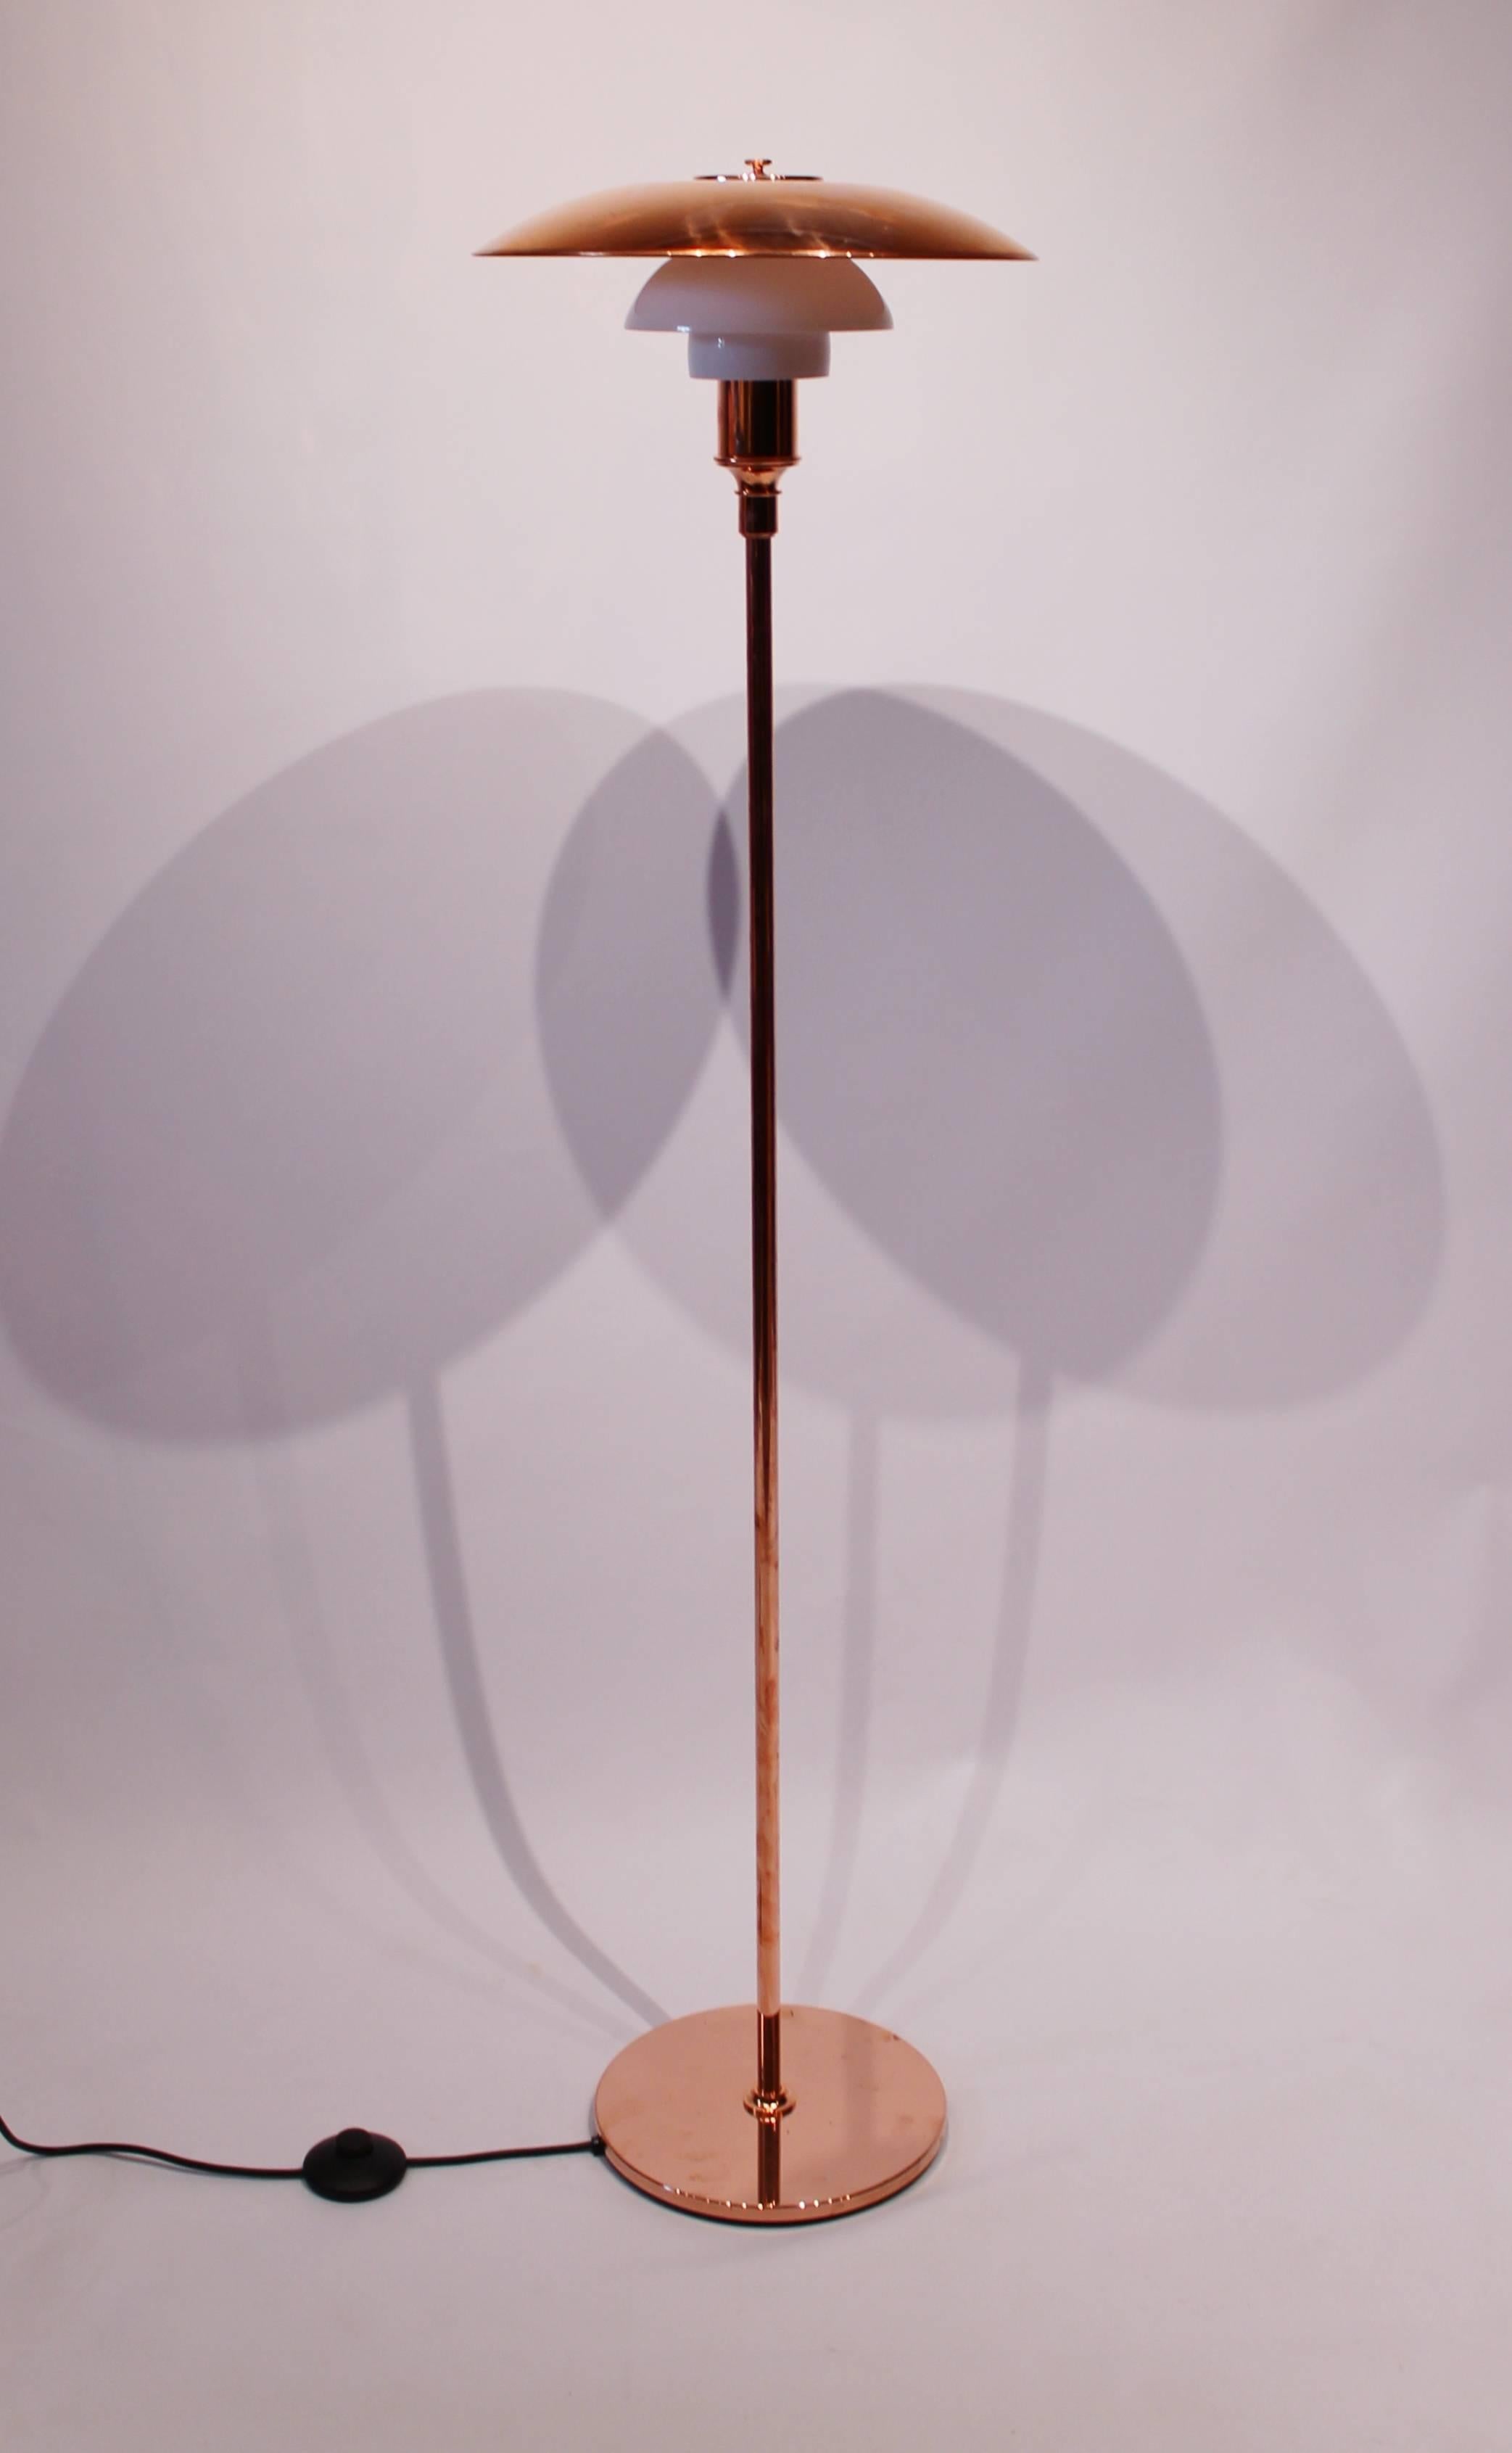 PH3½-2½, Limited Edition, Copper Floor Lamp by Poul Henningsen and Louis Poulsen 1